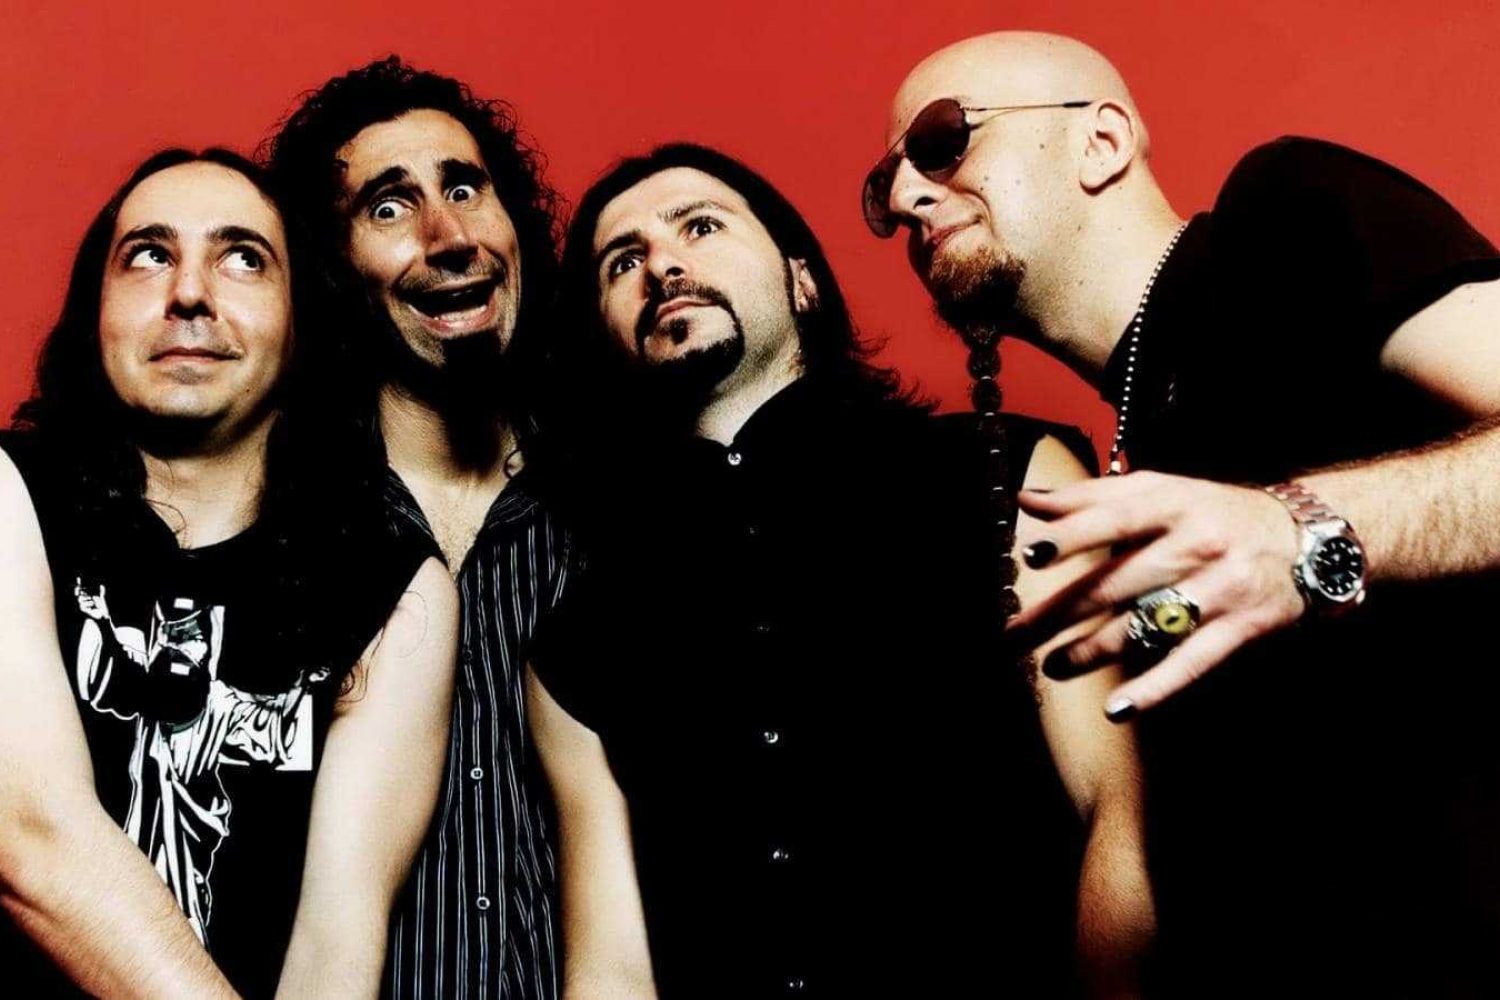 System Of A Down Toxicity Wallpapers